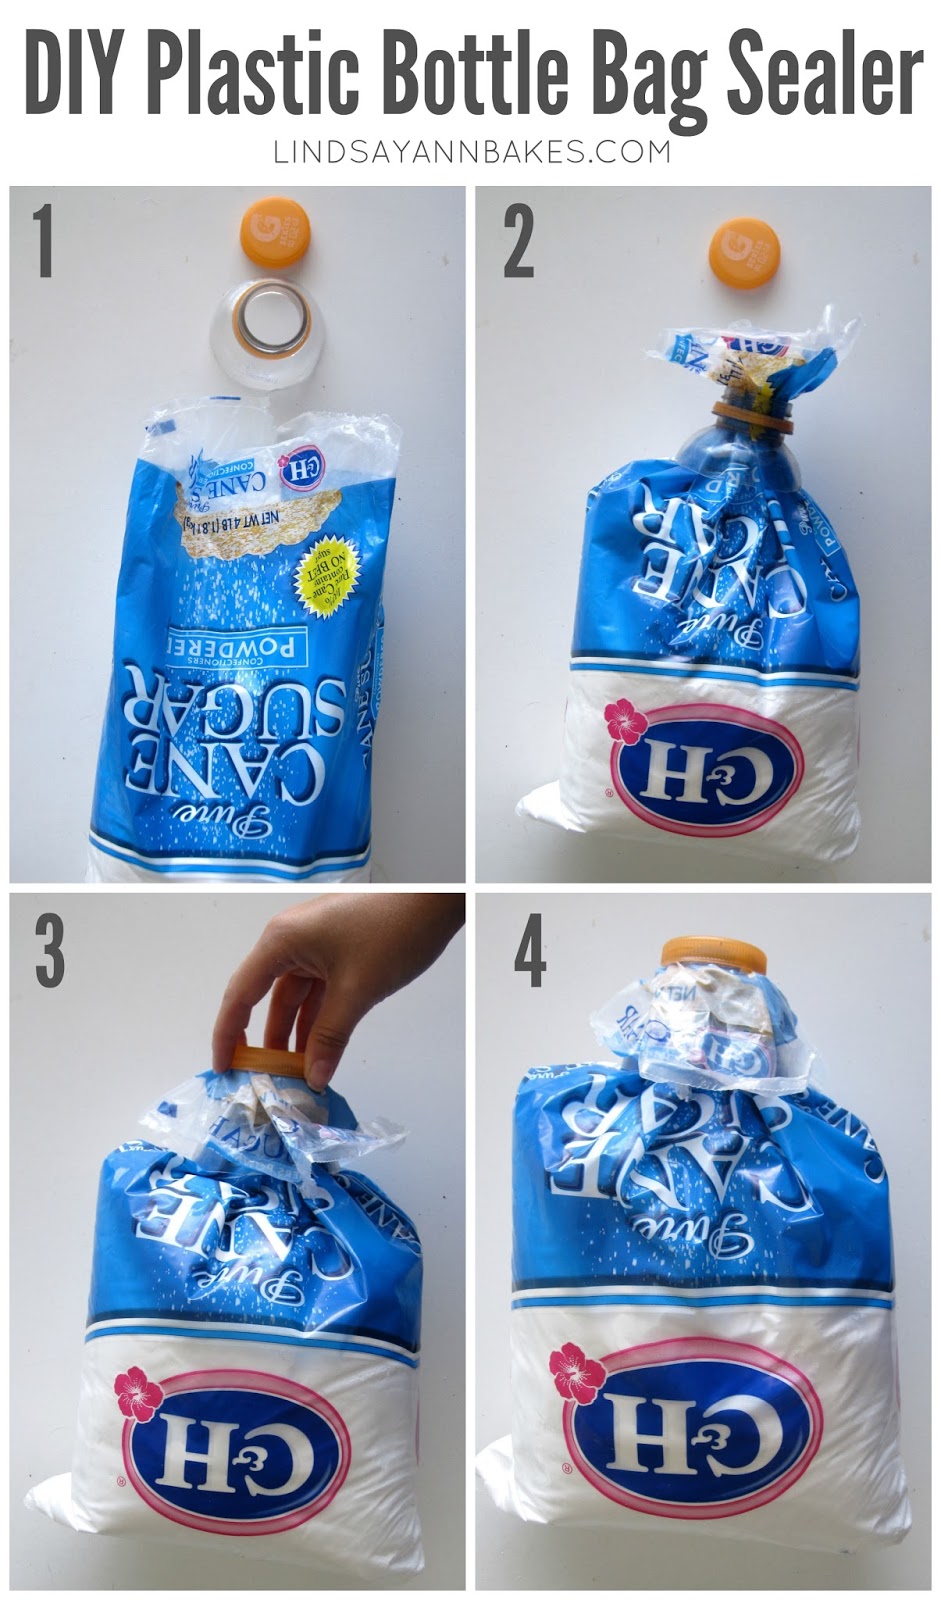 How to Seal a Plastic Bag l DIY Guide on Sealing a Plastic Bag in